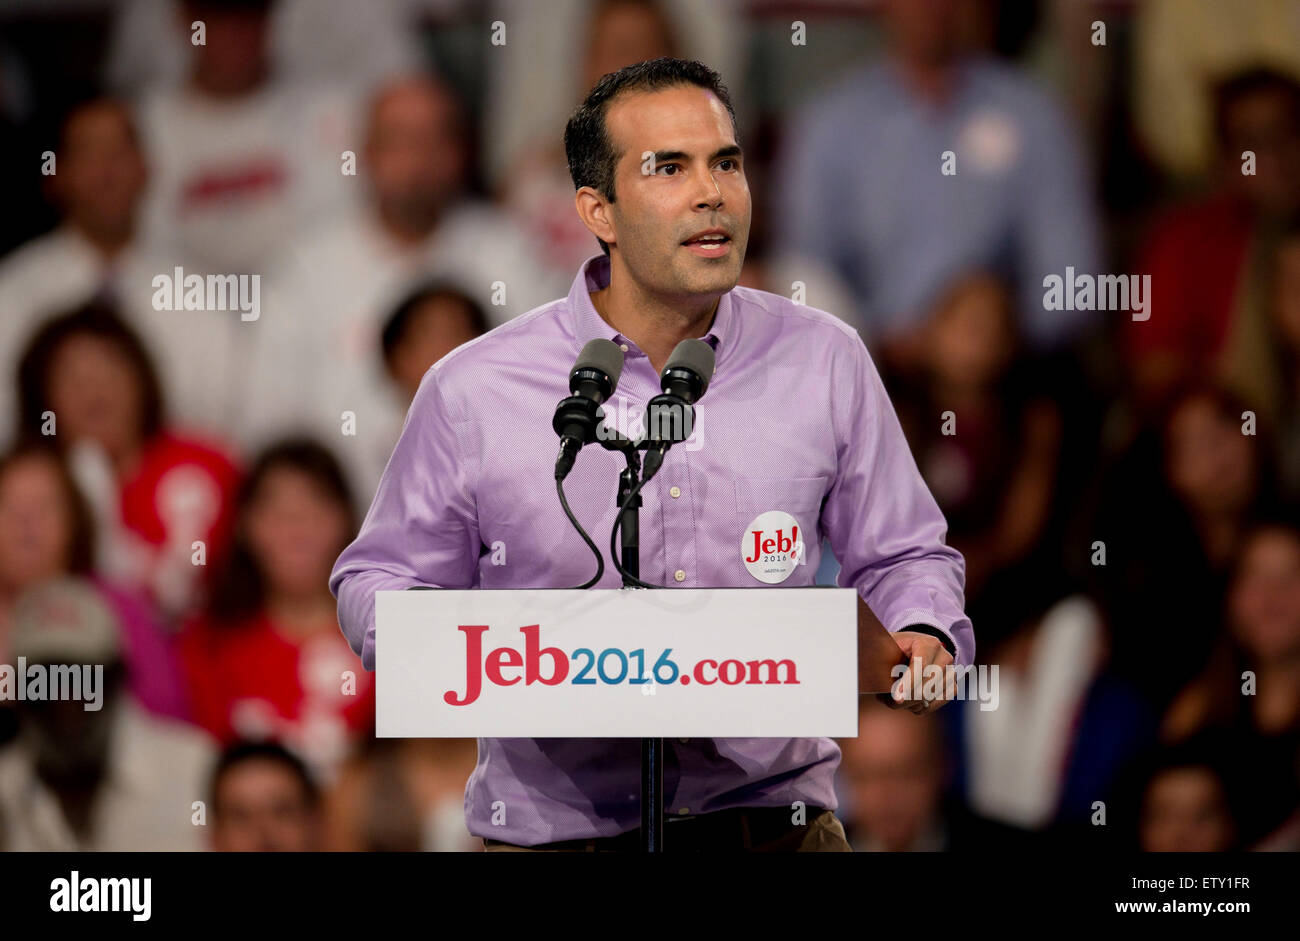 Miami, Florida, USA. 15th June, 2015. GEORGE P. BUSH, Texas Land Commissioner and son of former Florida Governor JEB BUSH, makes introductory remarks at his father's announcement at Miami-Dade College that he's seeking the Republican nomination to run for U.S. President in 2016. © Brian Cahn/ZUMA Wire/Alamy Live News Stock Photo